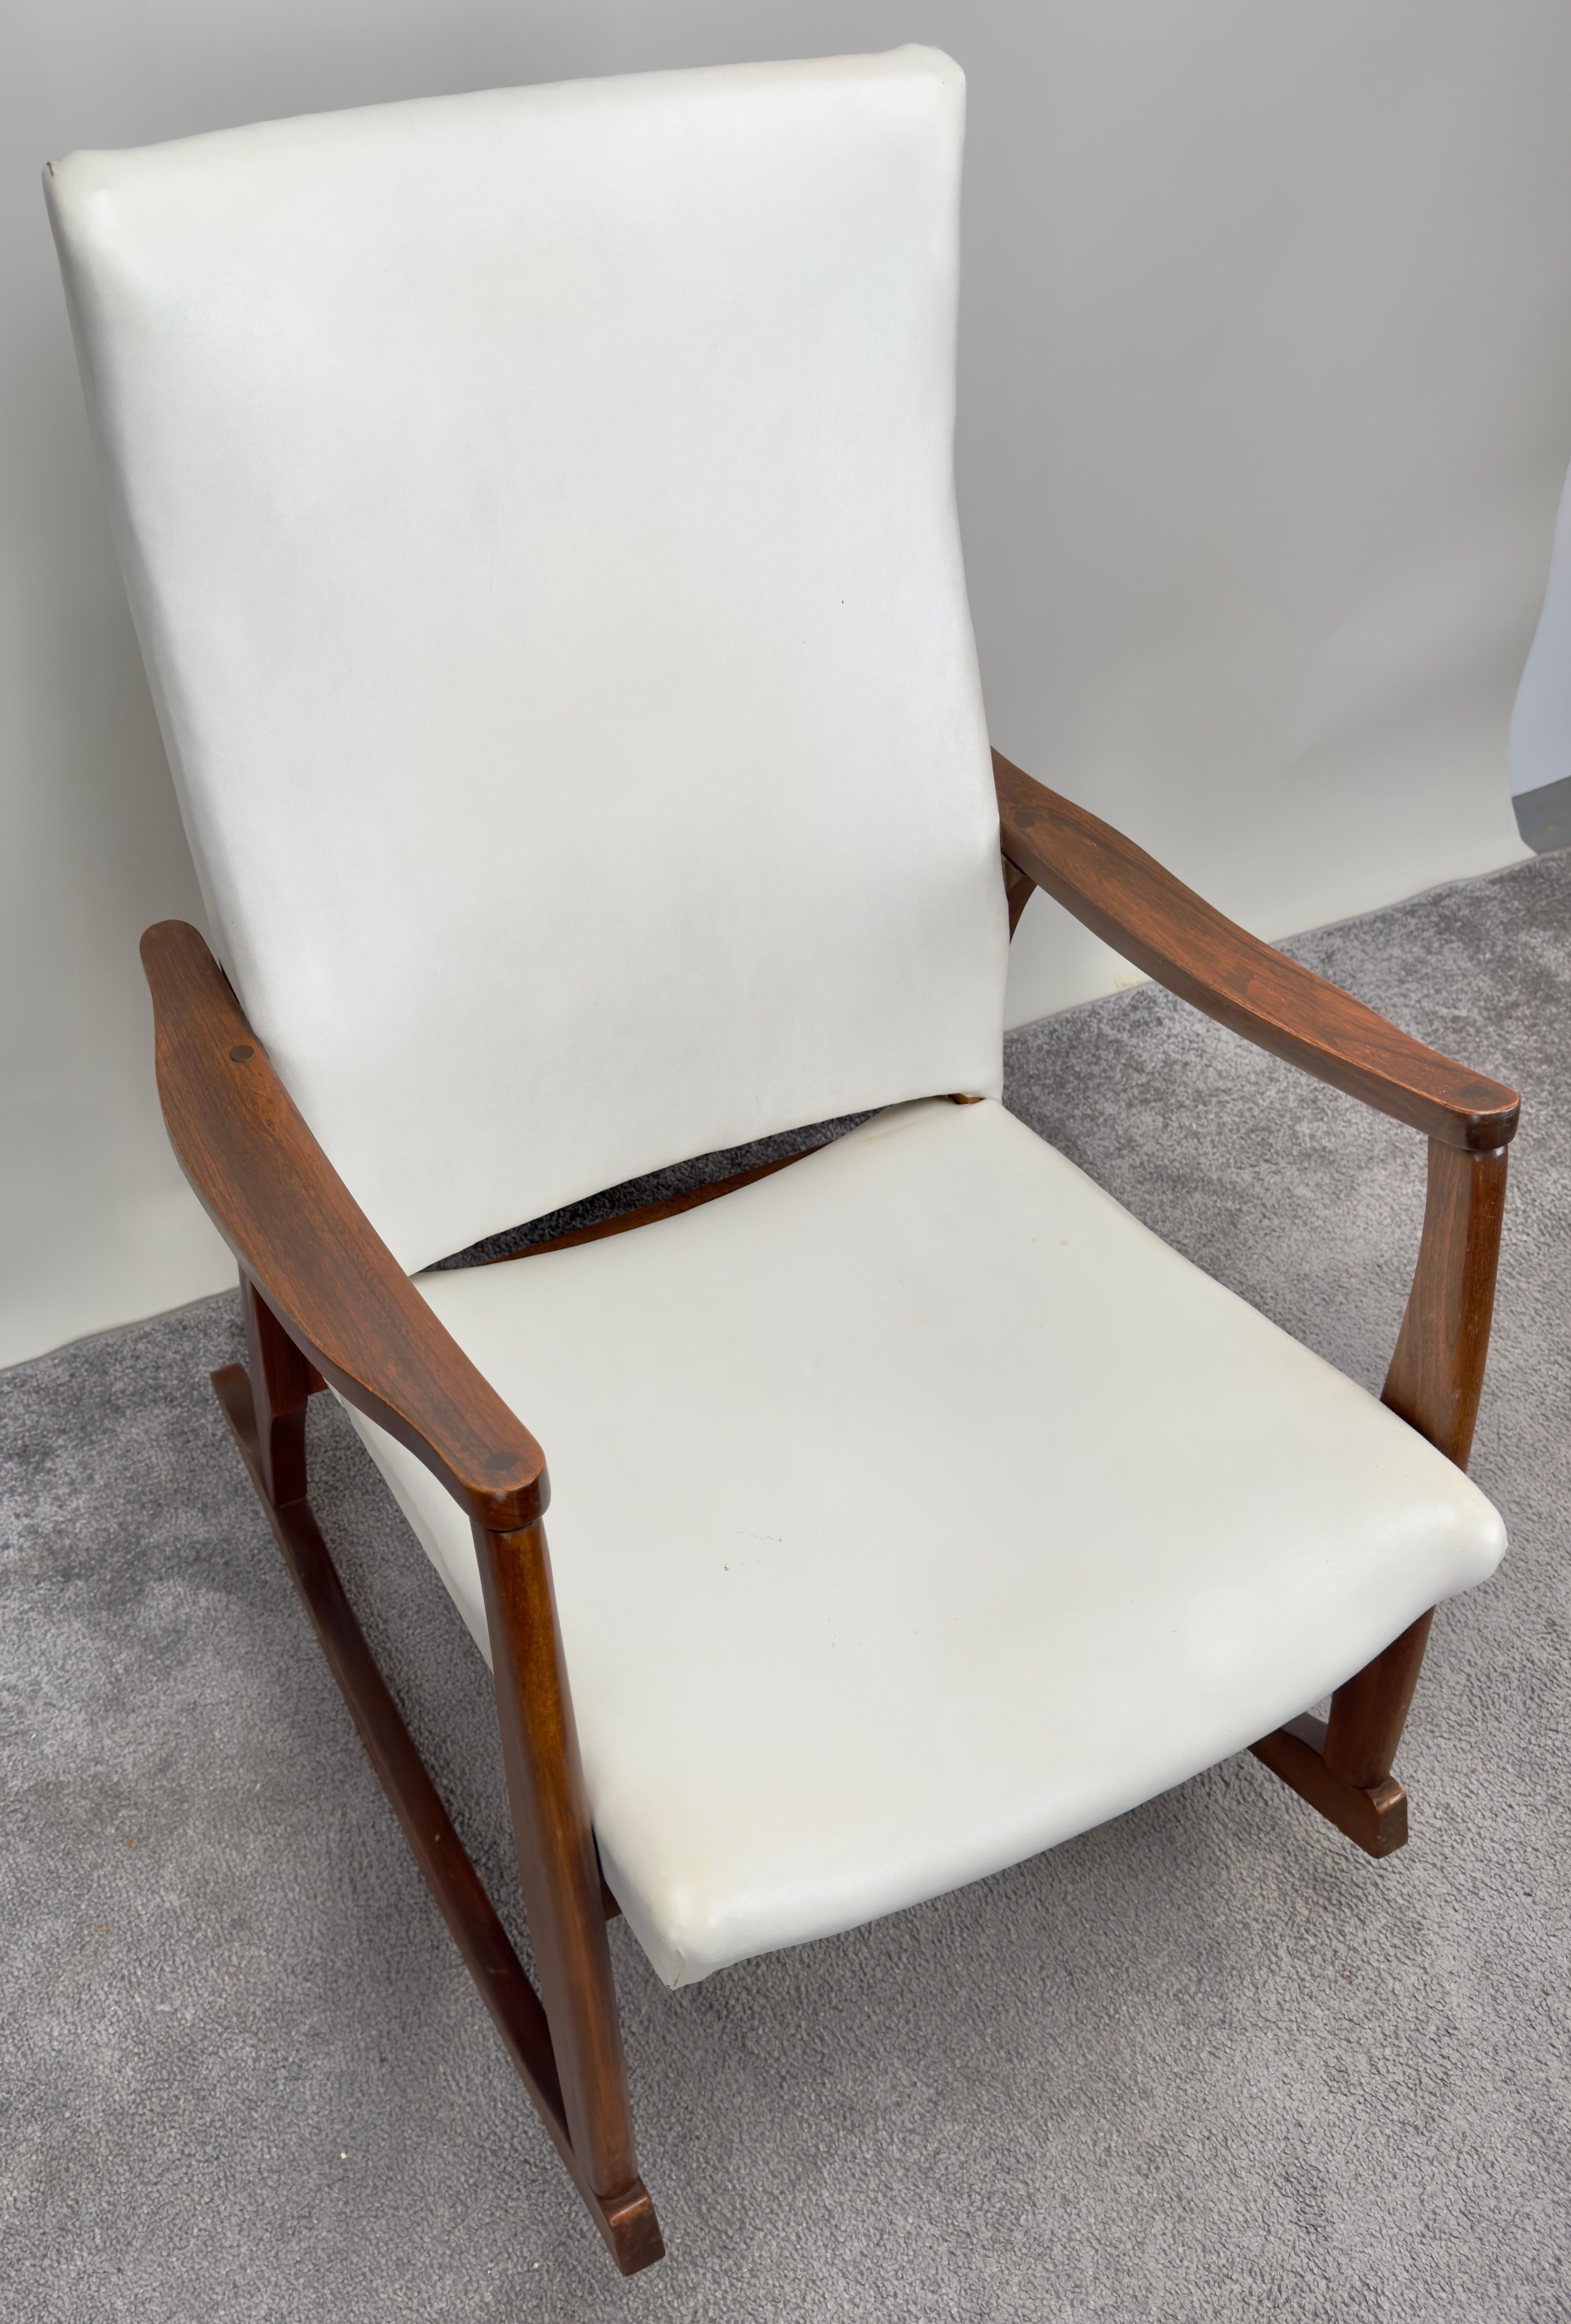 20th Century Milo Baughman Style MCM in White Faux Leather Rocking Chair  For Sale